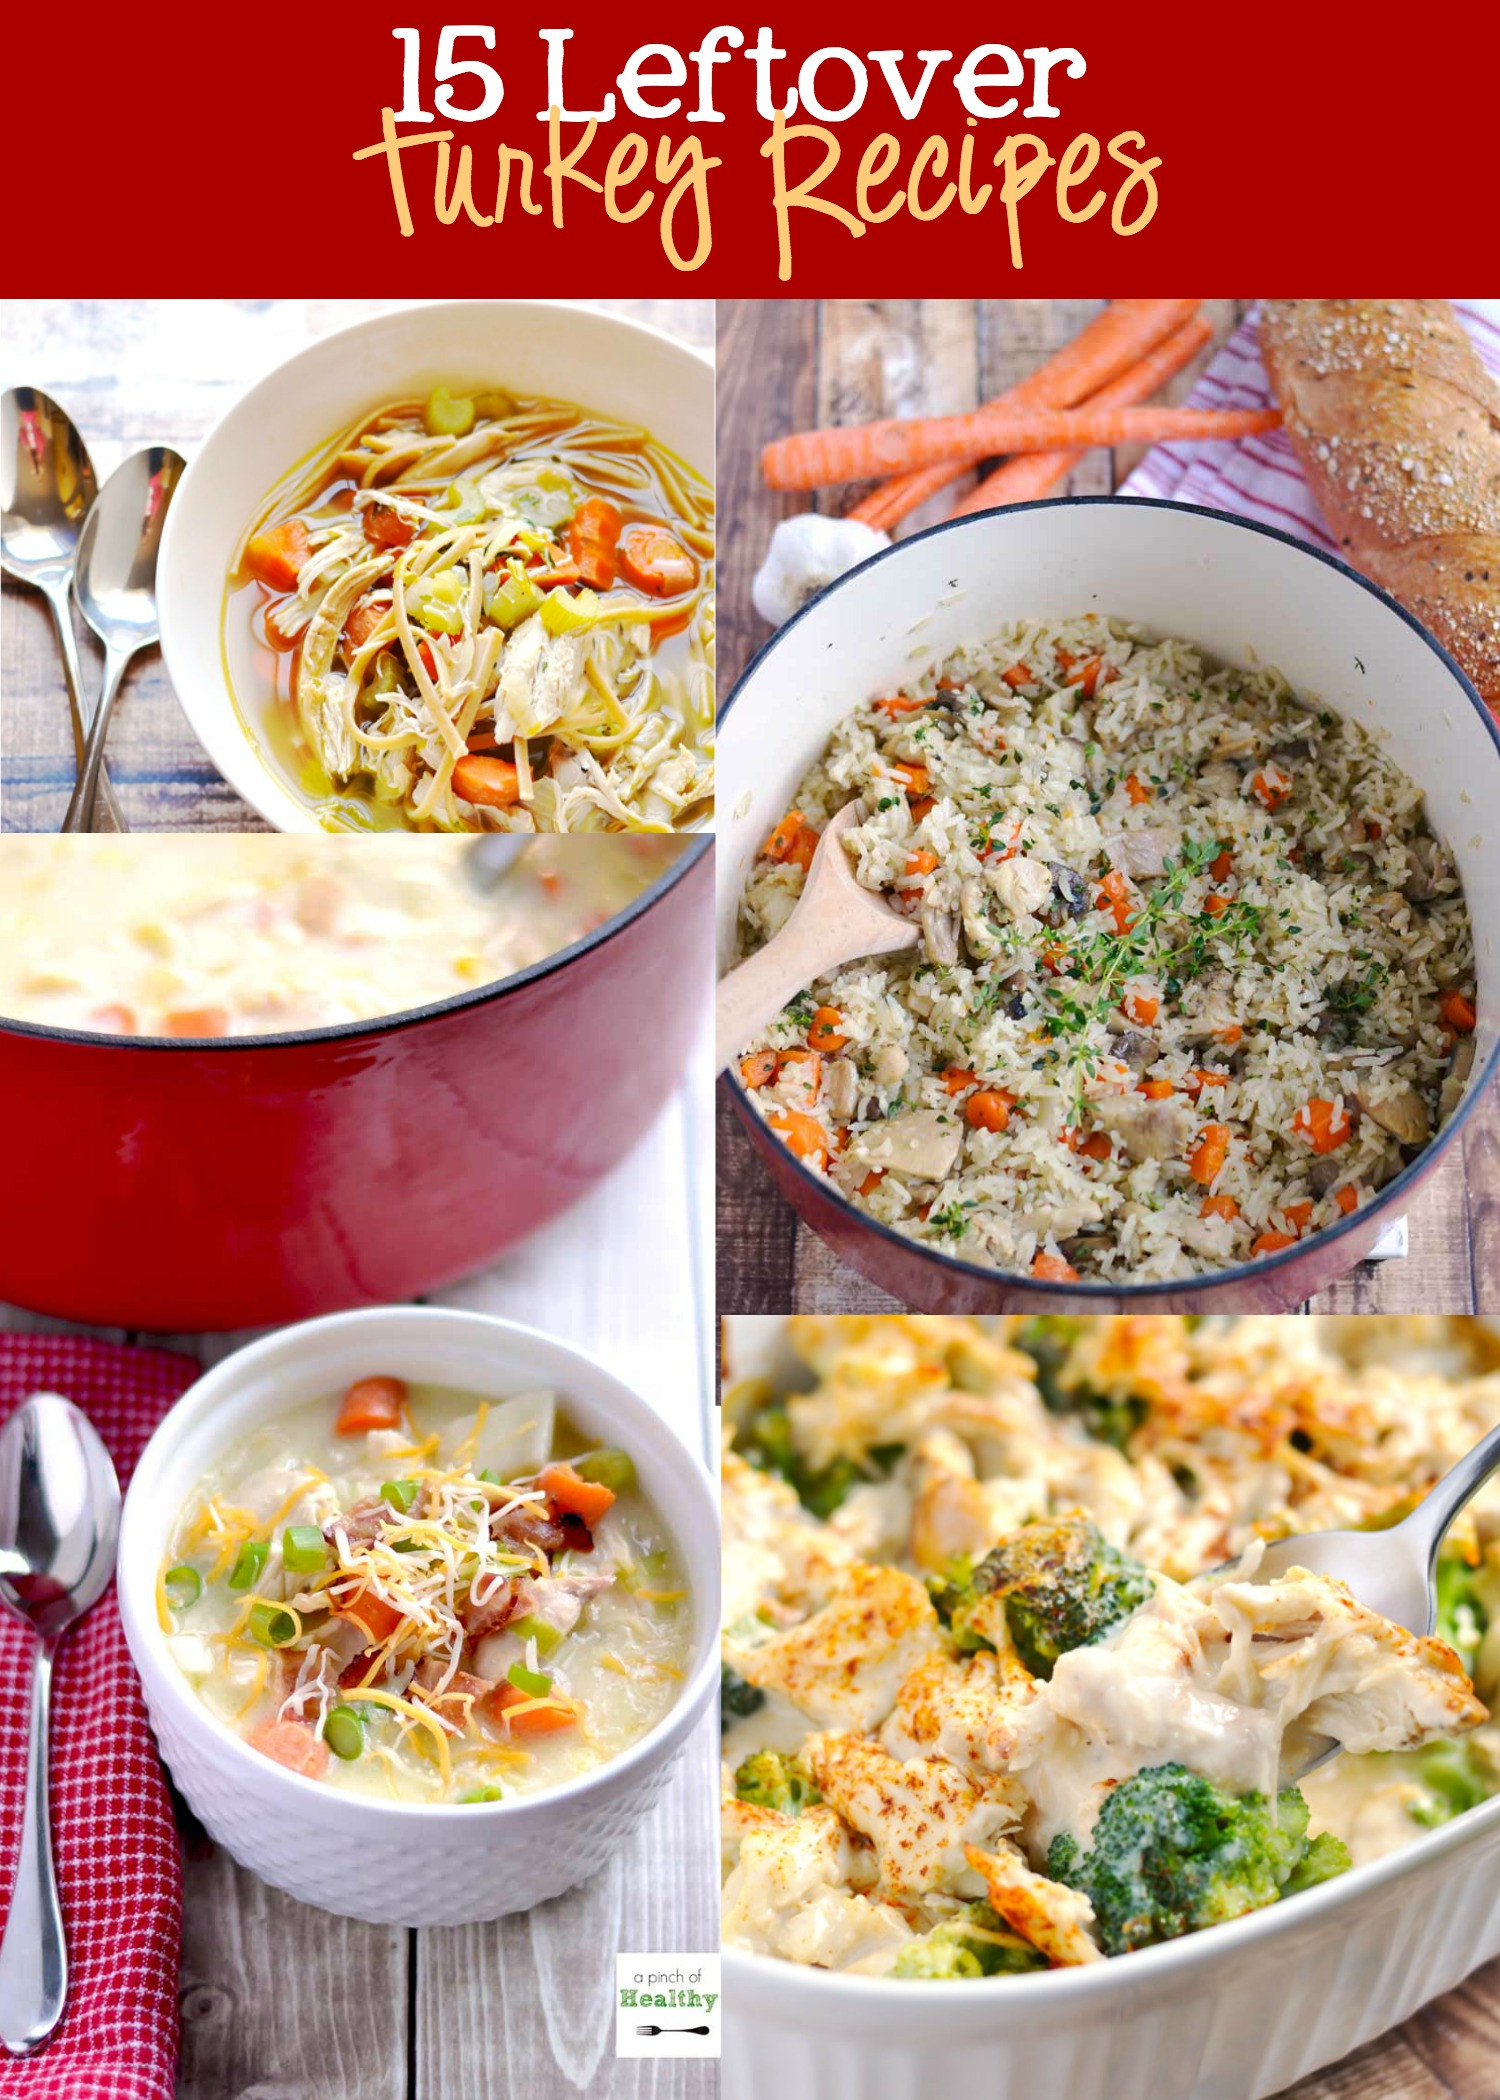 Left Over Thanksgiving Turkey Recipes
 Leftover Turkey Recipes Roundup A Pinch of Healthy